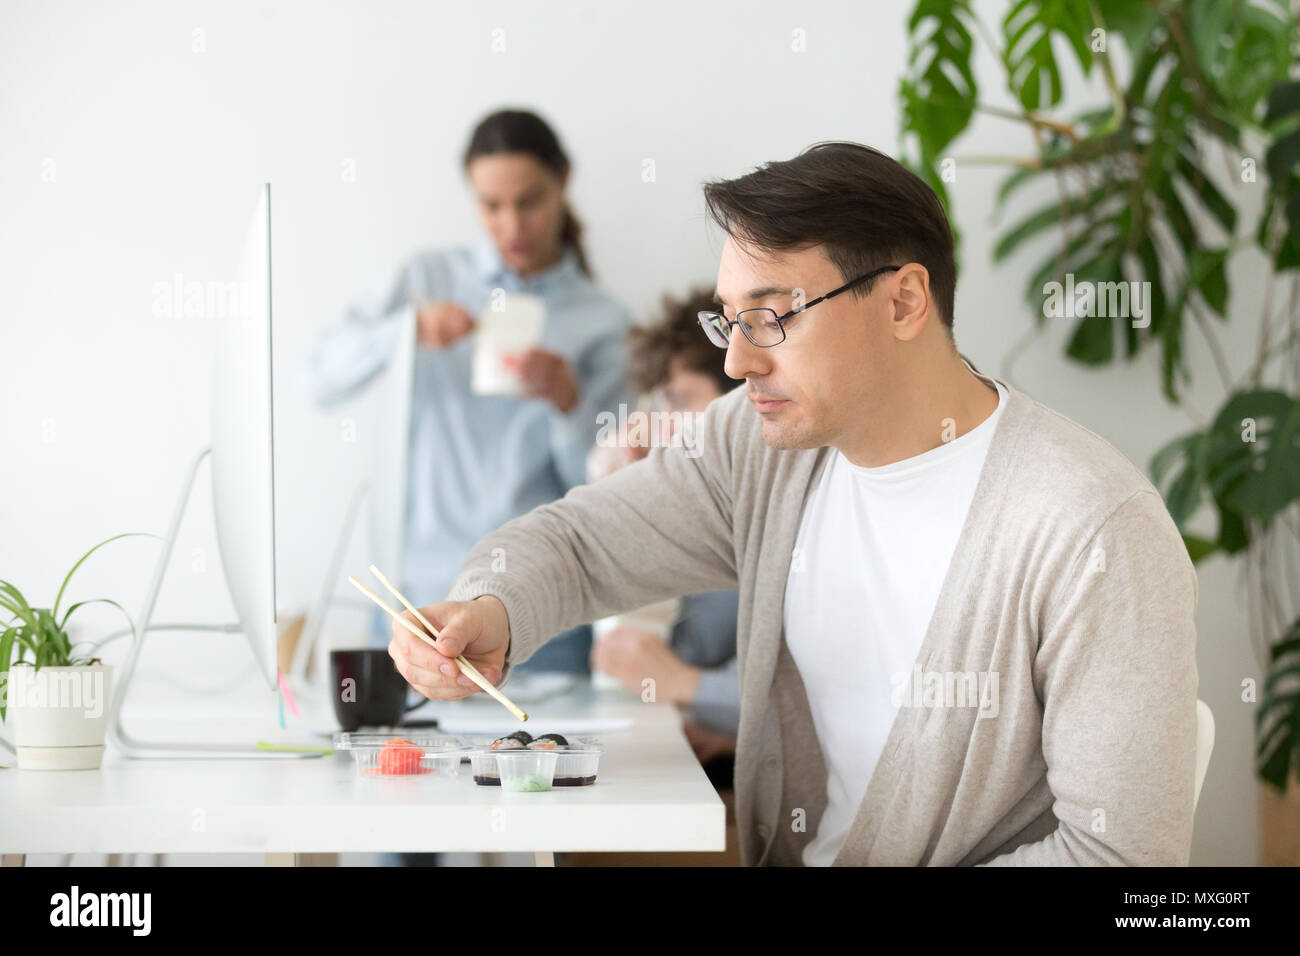 Middle aged worker eating sushi during office work break Stock Photo